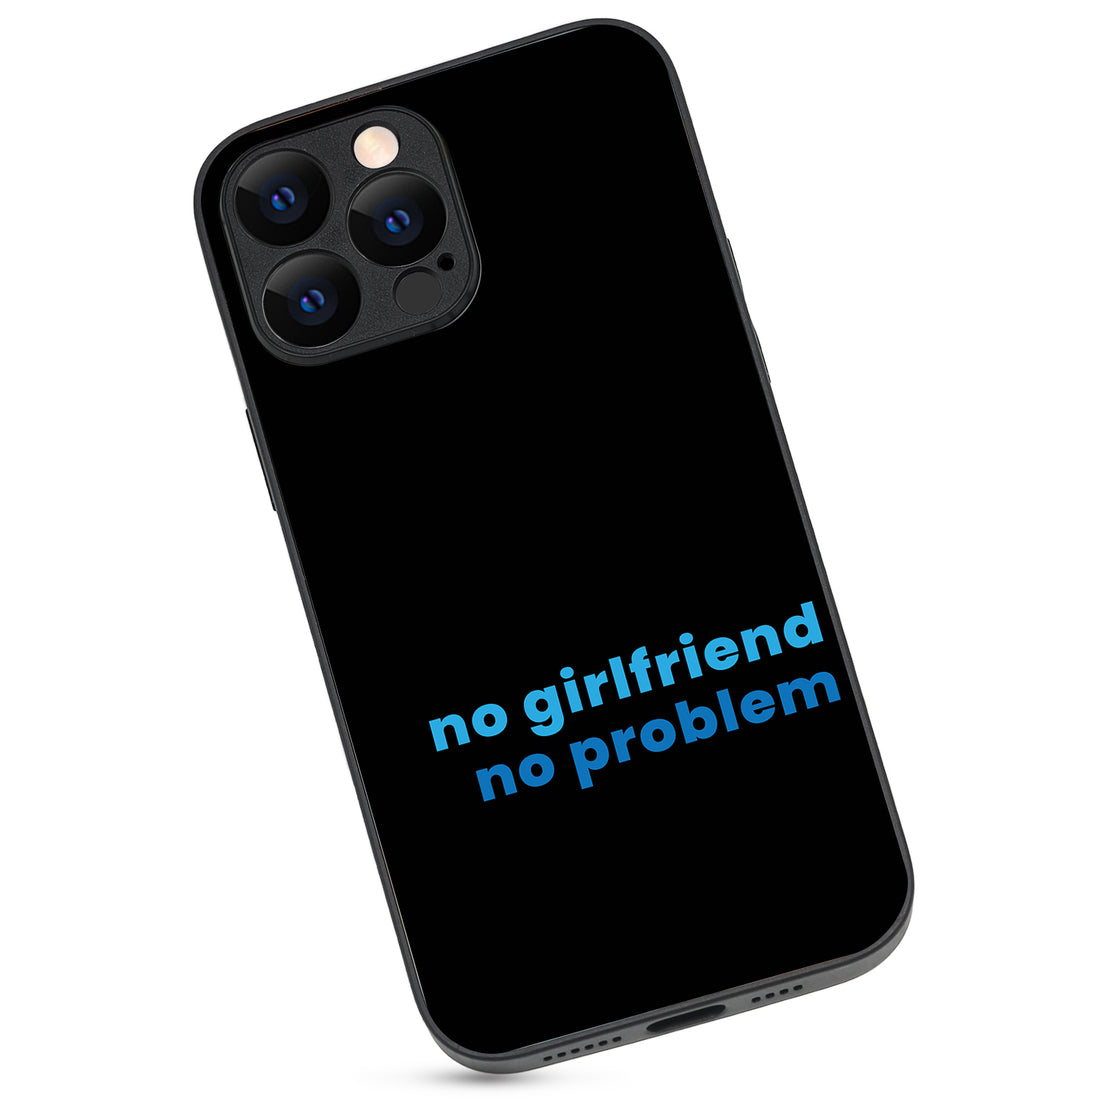 No Girlfried Motivational Quotes iPhone 13 Pro Max Case